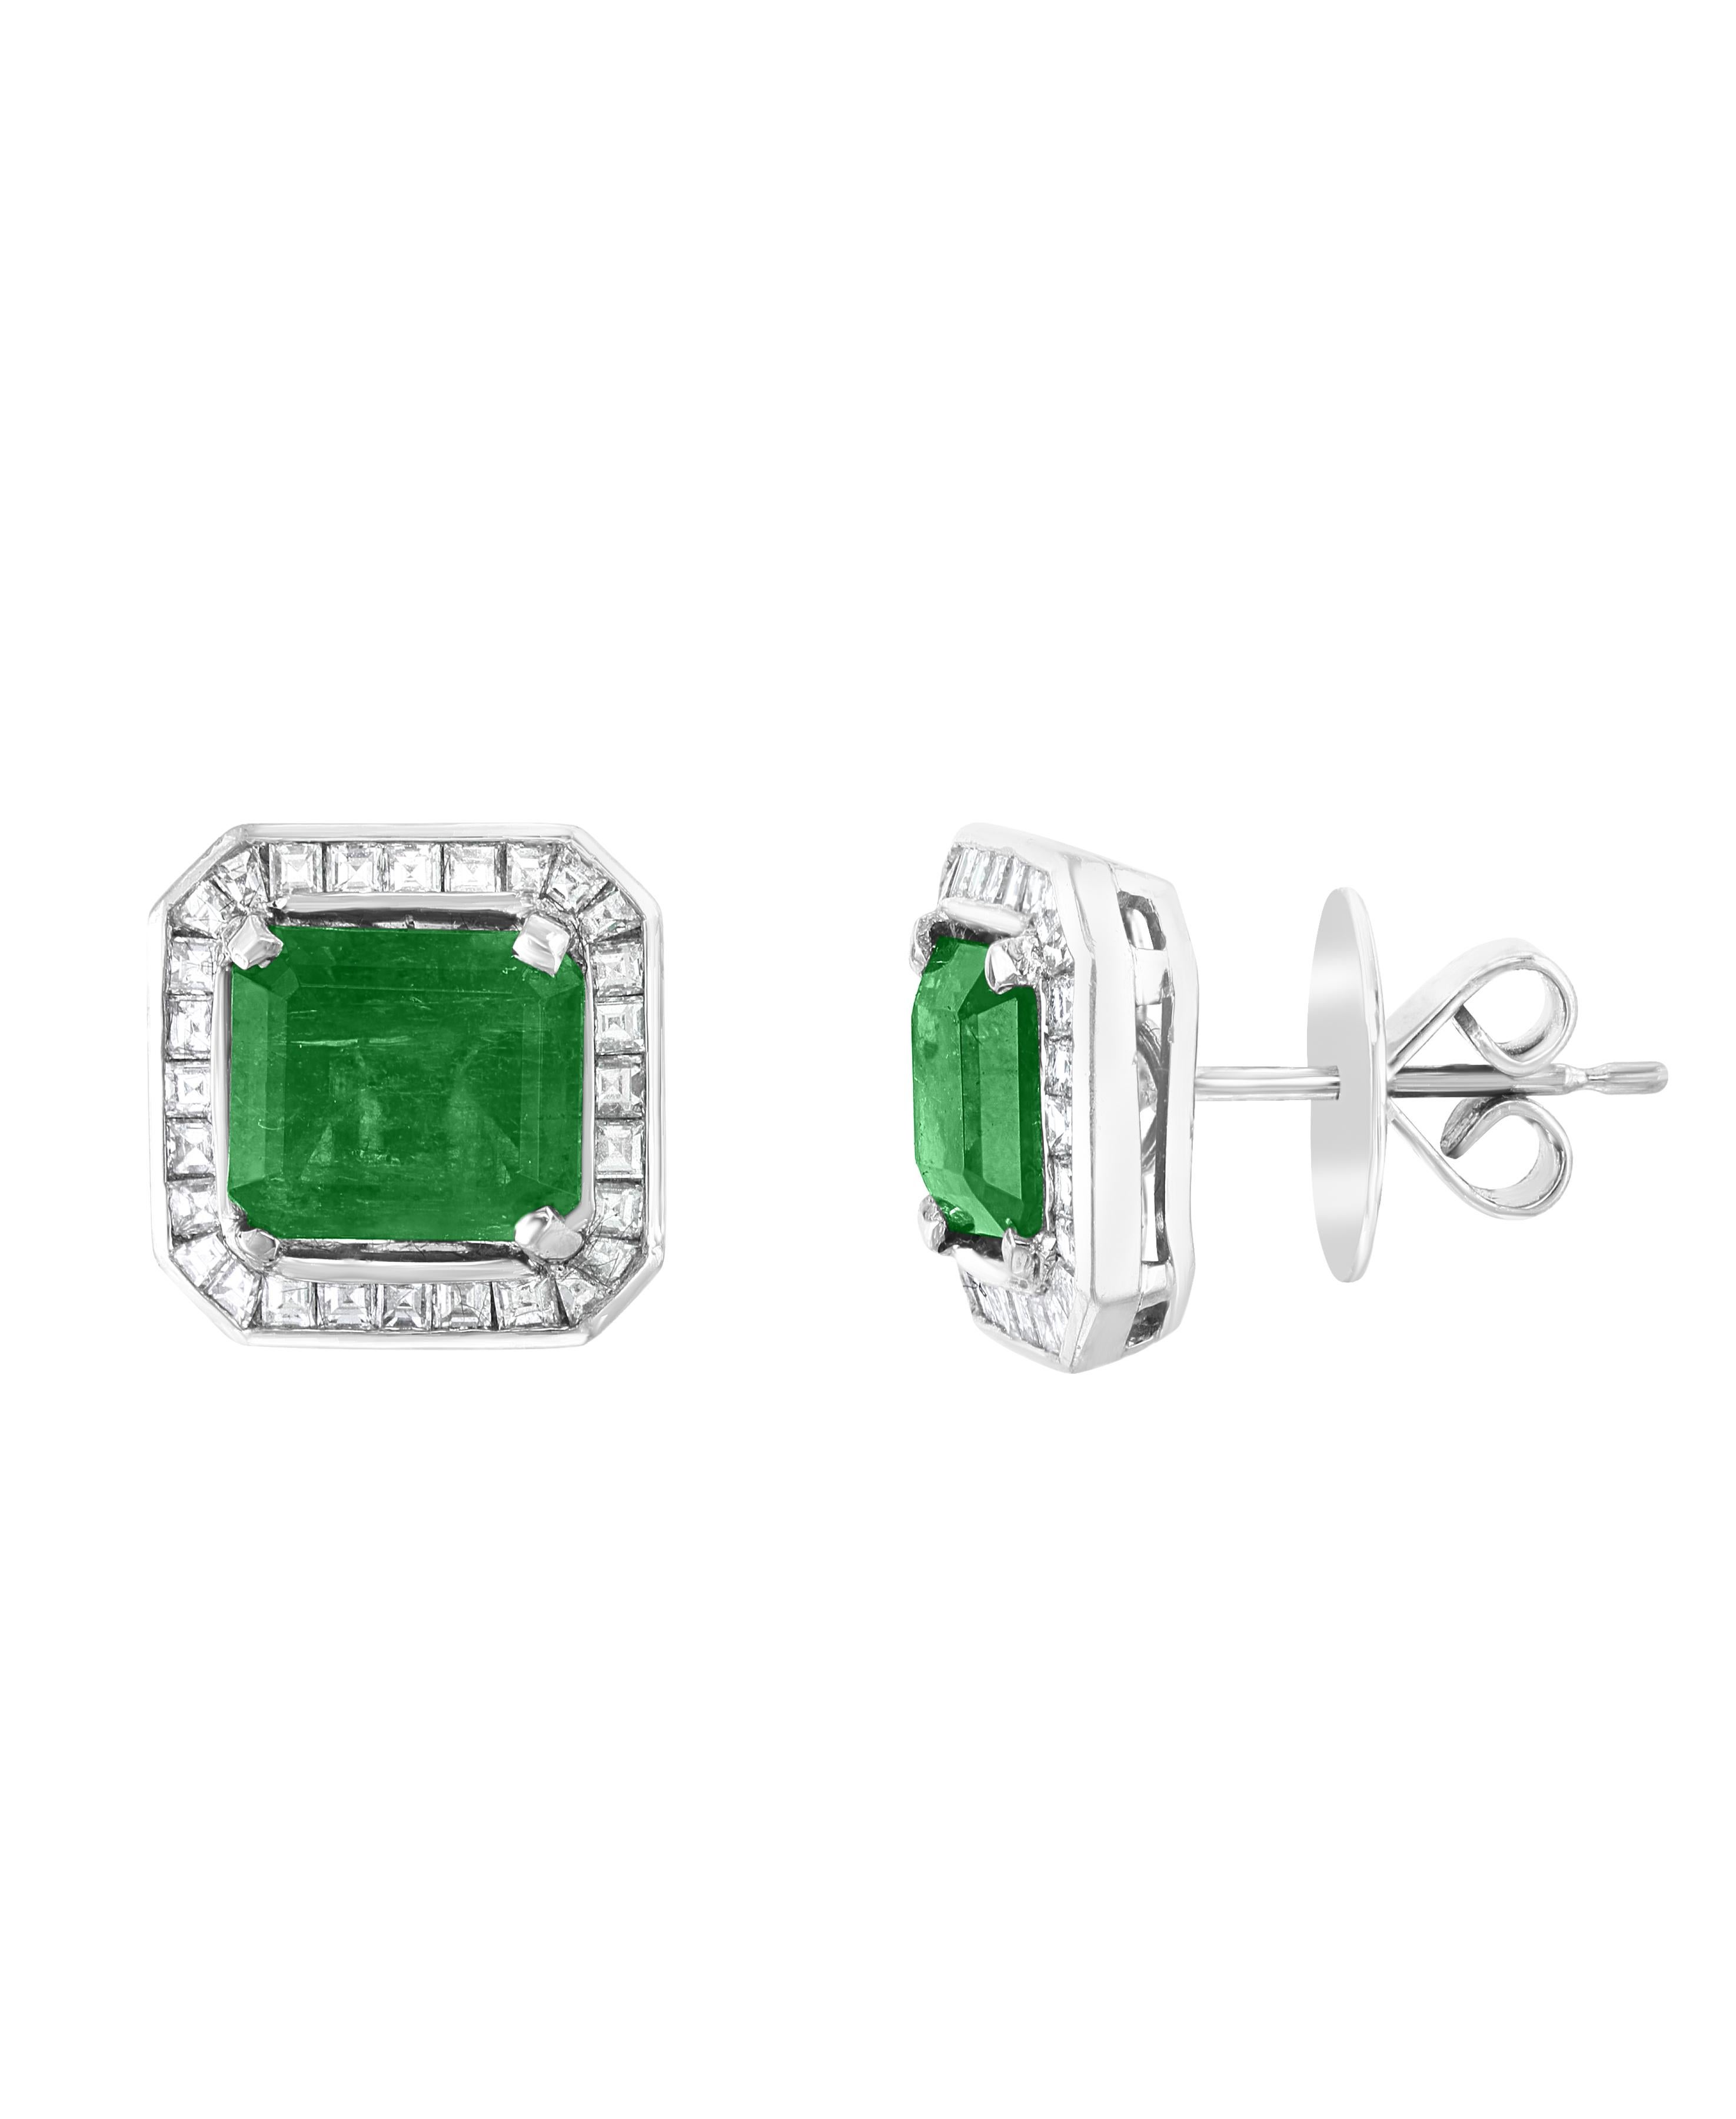 AGL Certified Minor Traditional 5 Carat Colombian Emerald Diamond  Stud Earrings
5 Carat finest Colombian Emerald Cut Emerald  Diamond  Post  Earrings  18 Karat Gold 
This exquisite pair of earrings are beautifully crafted with 18 karat White gold